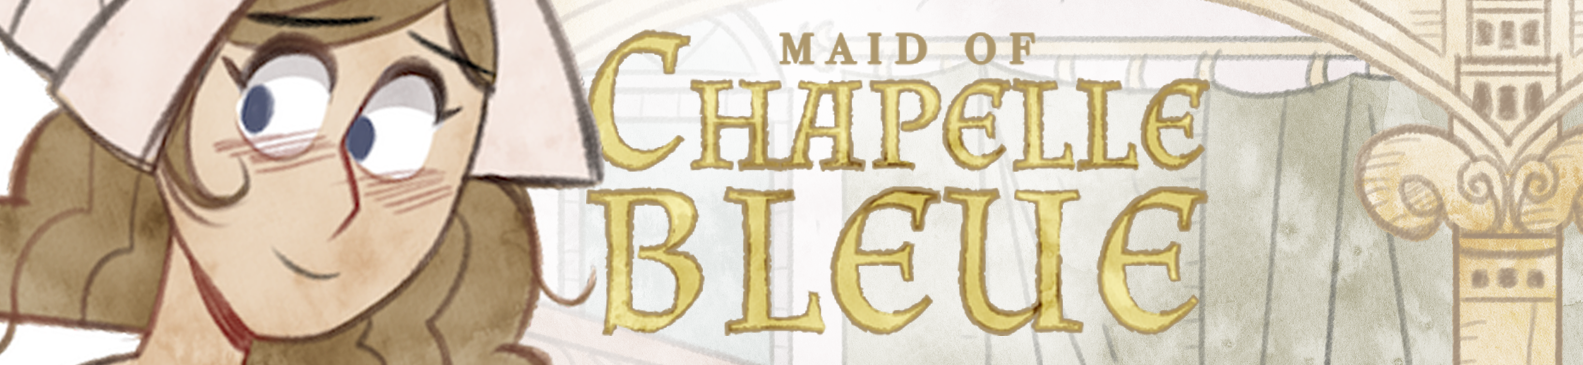 Maid of Chapelle Bleue